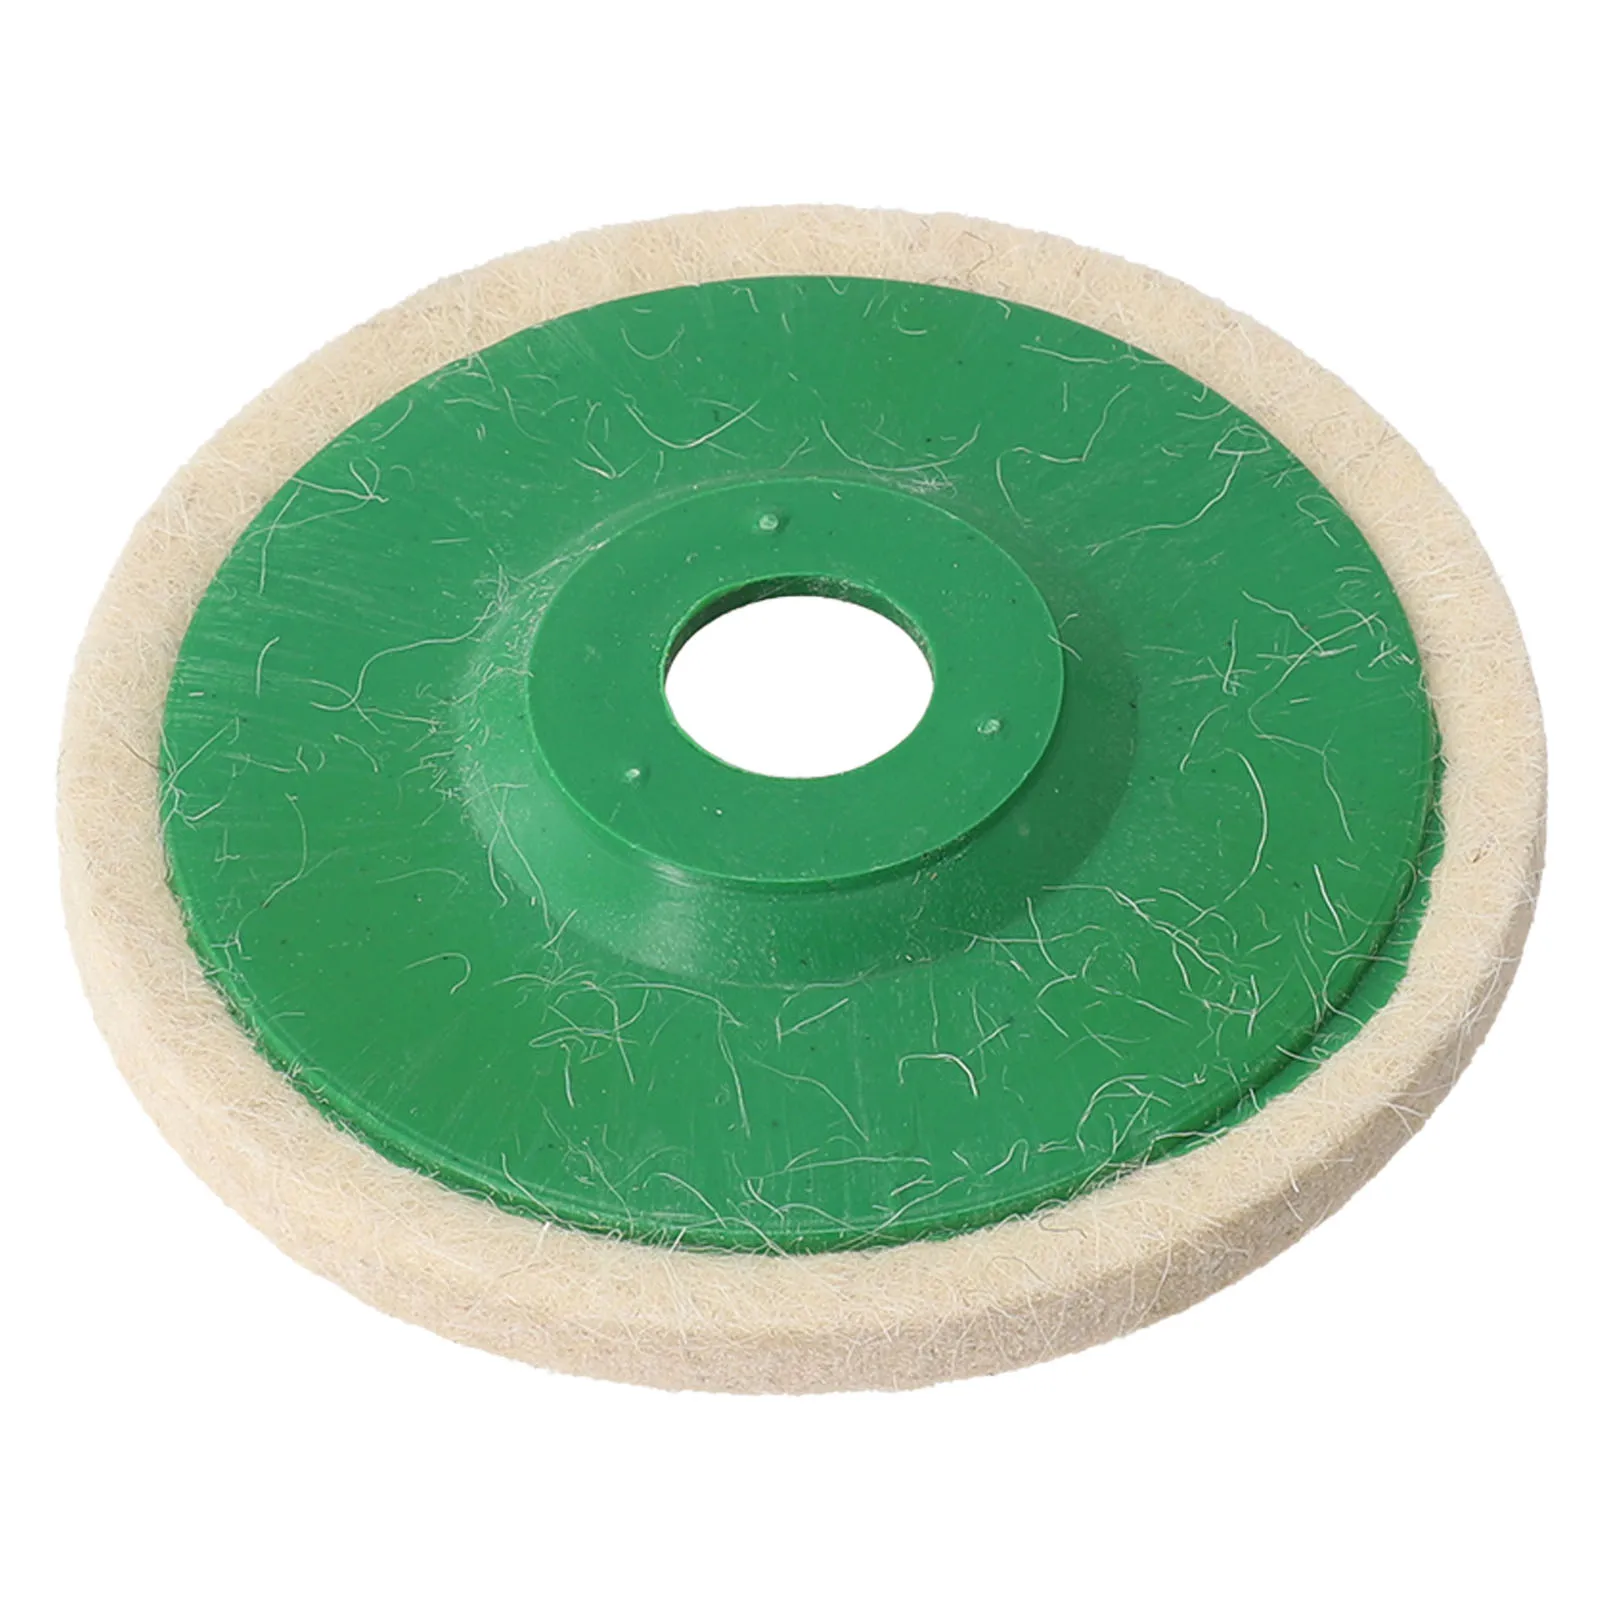 1pc Wool Felt Polishing Pads 5inch Angle Grinder Wheel Felt Polishing Pad Disc For Metal Marble Glass Ceramics Power Tool Parts 10 pcs scriber marking tool widely used for ceramics hardened steel drywall